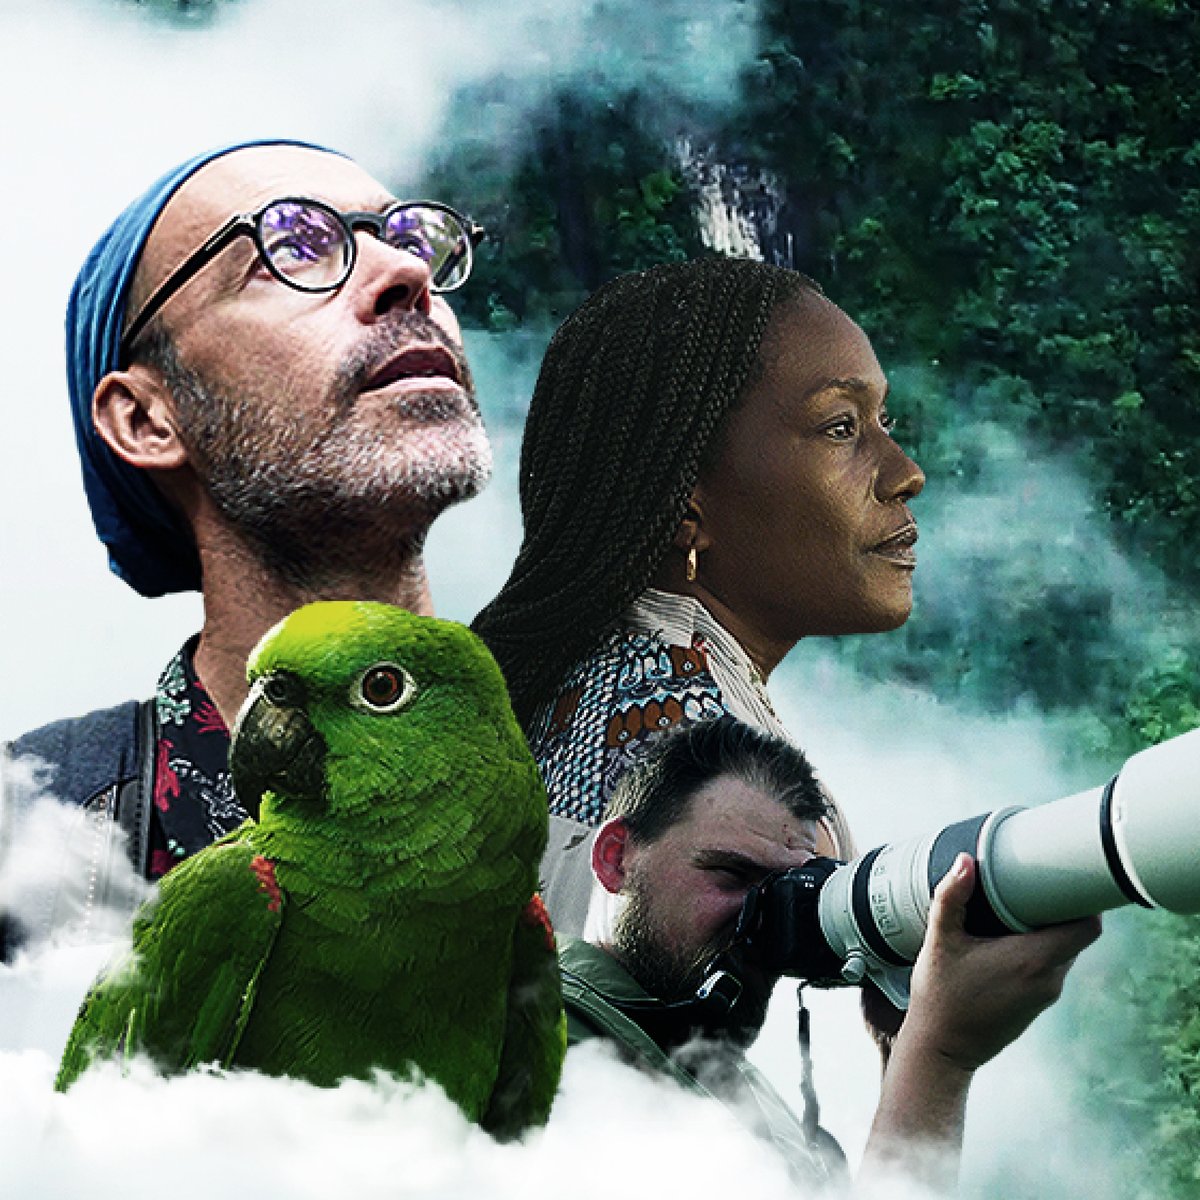 WhereNext has done it again!
#FindingEncanto, our latest production for @ColombiaTravel, showcases Colombia's diversity and charm through the eyes of 6 global travelers. This series is inspired by the Disney's movie Encanto. #FeelSomething while exploring Colombia's magic!🧵